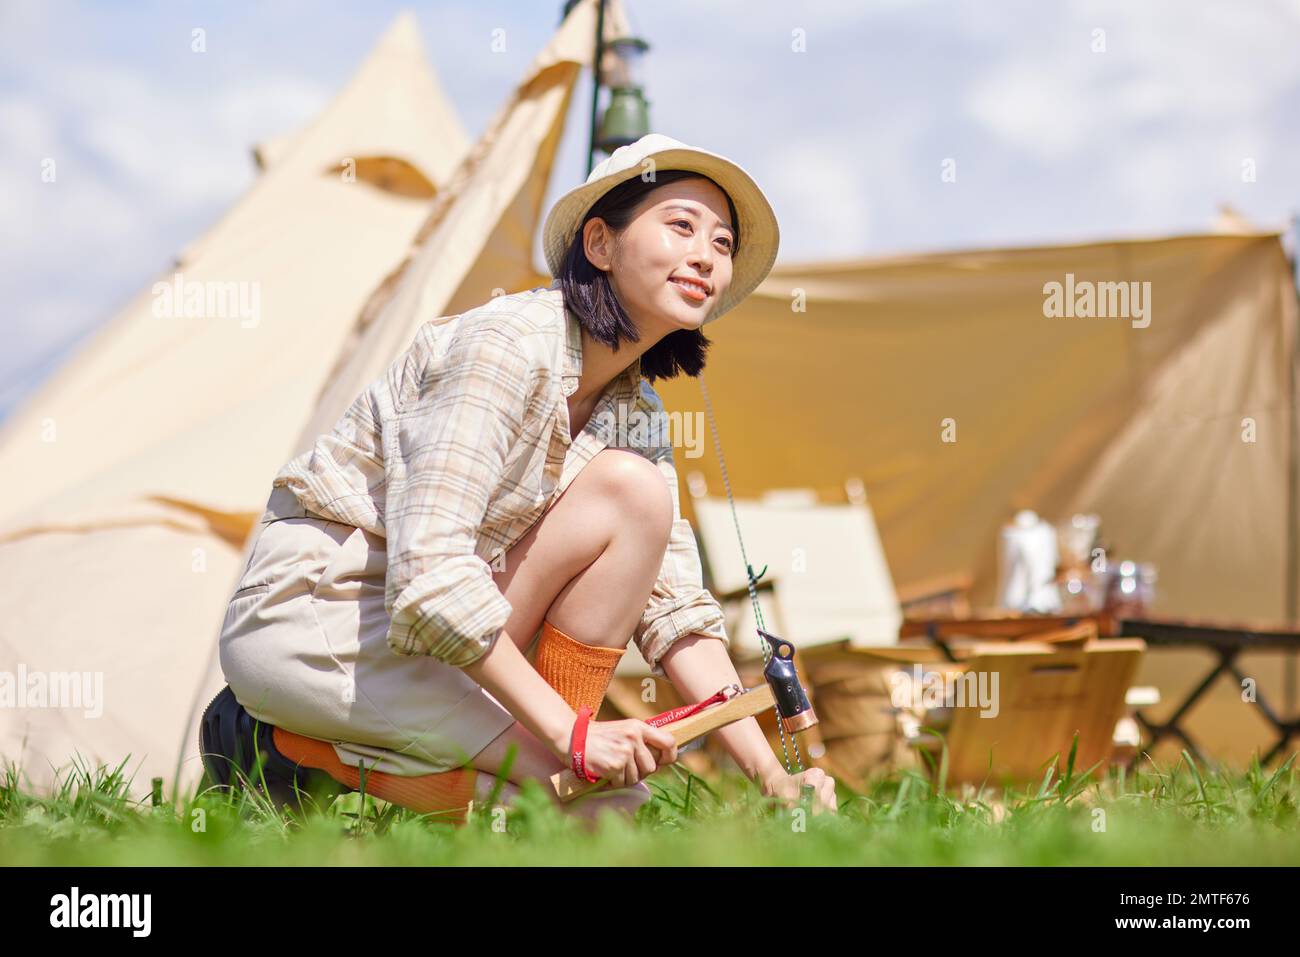 Young Japanese woman at campsite Stock Photo